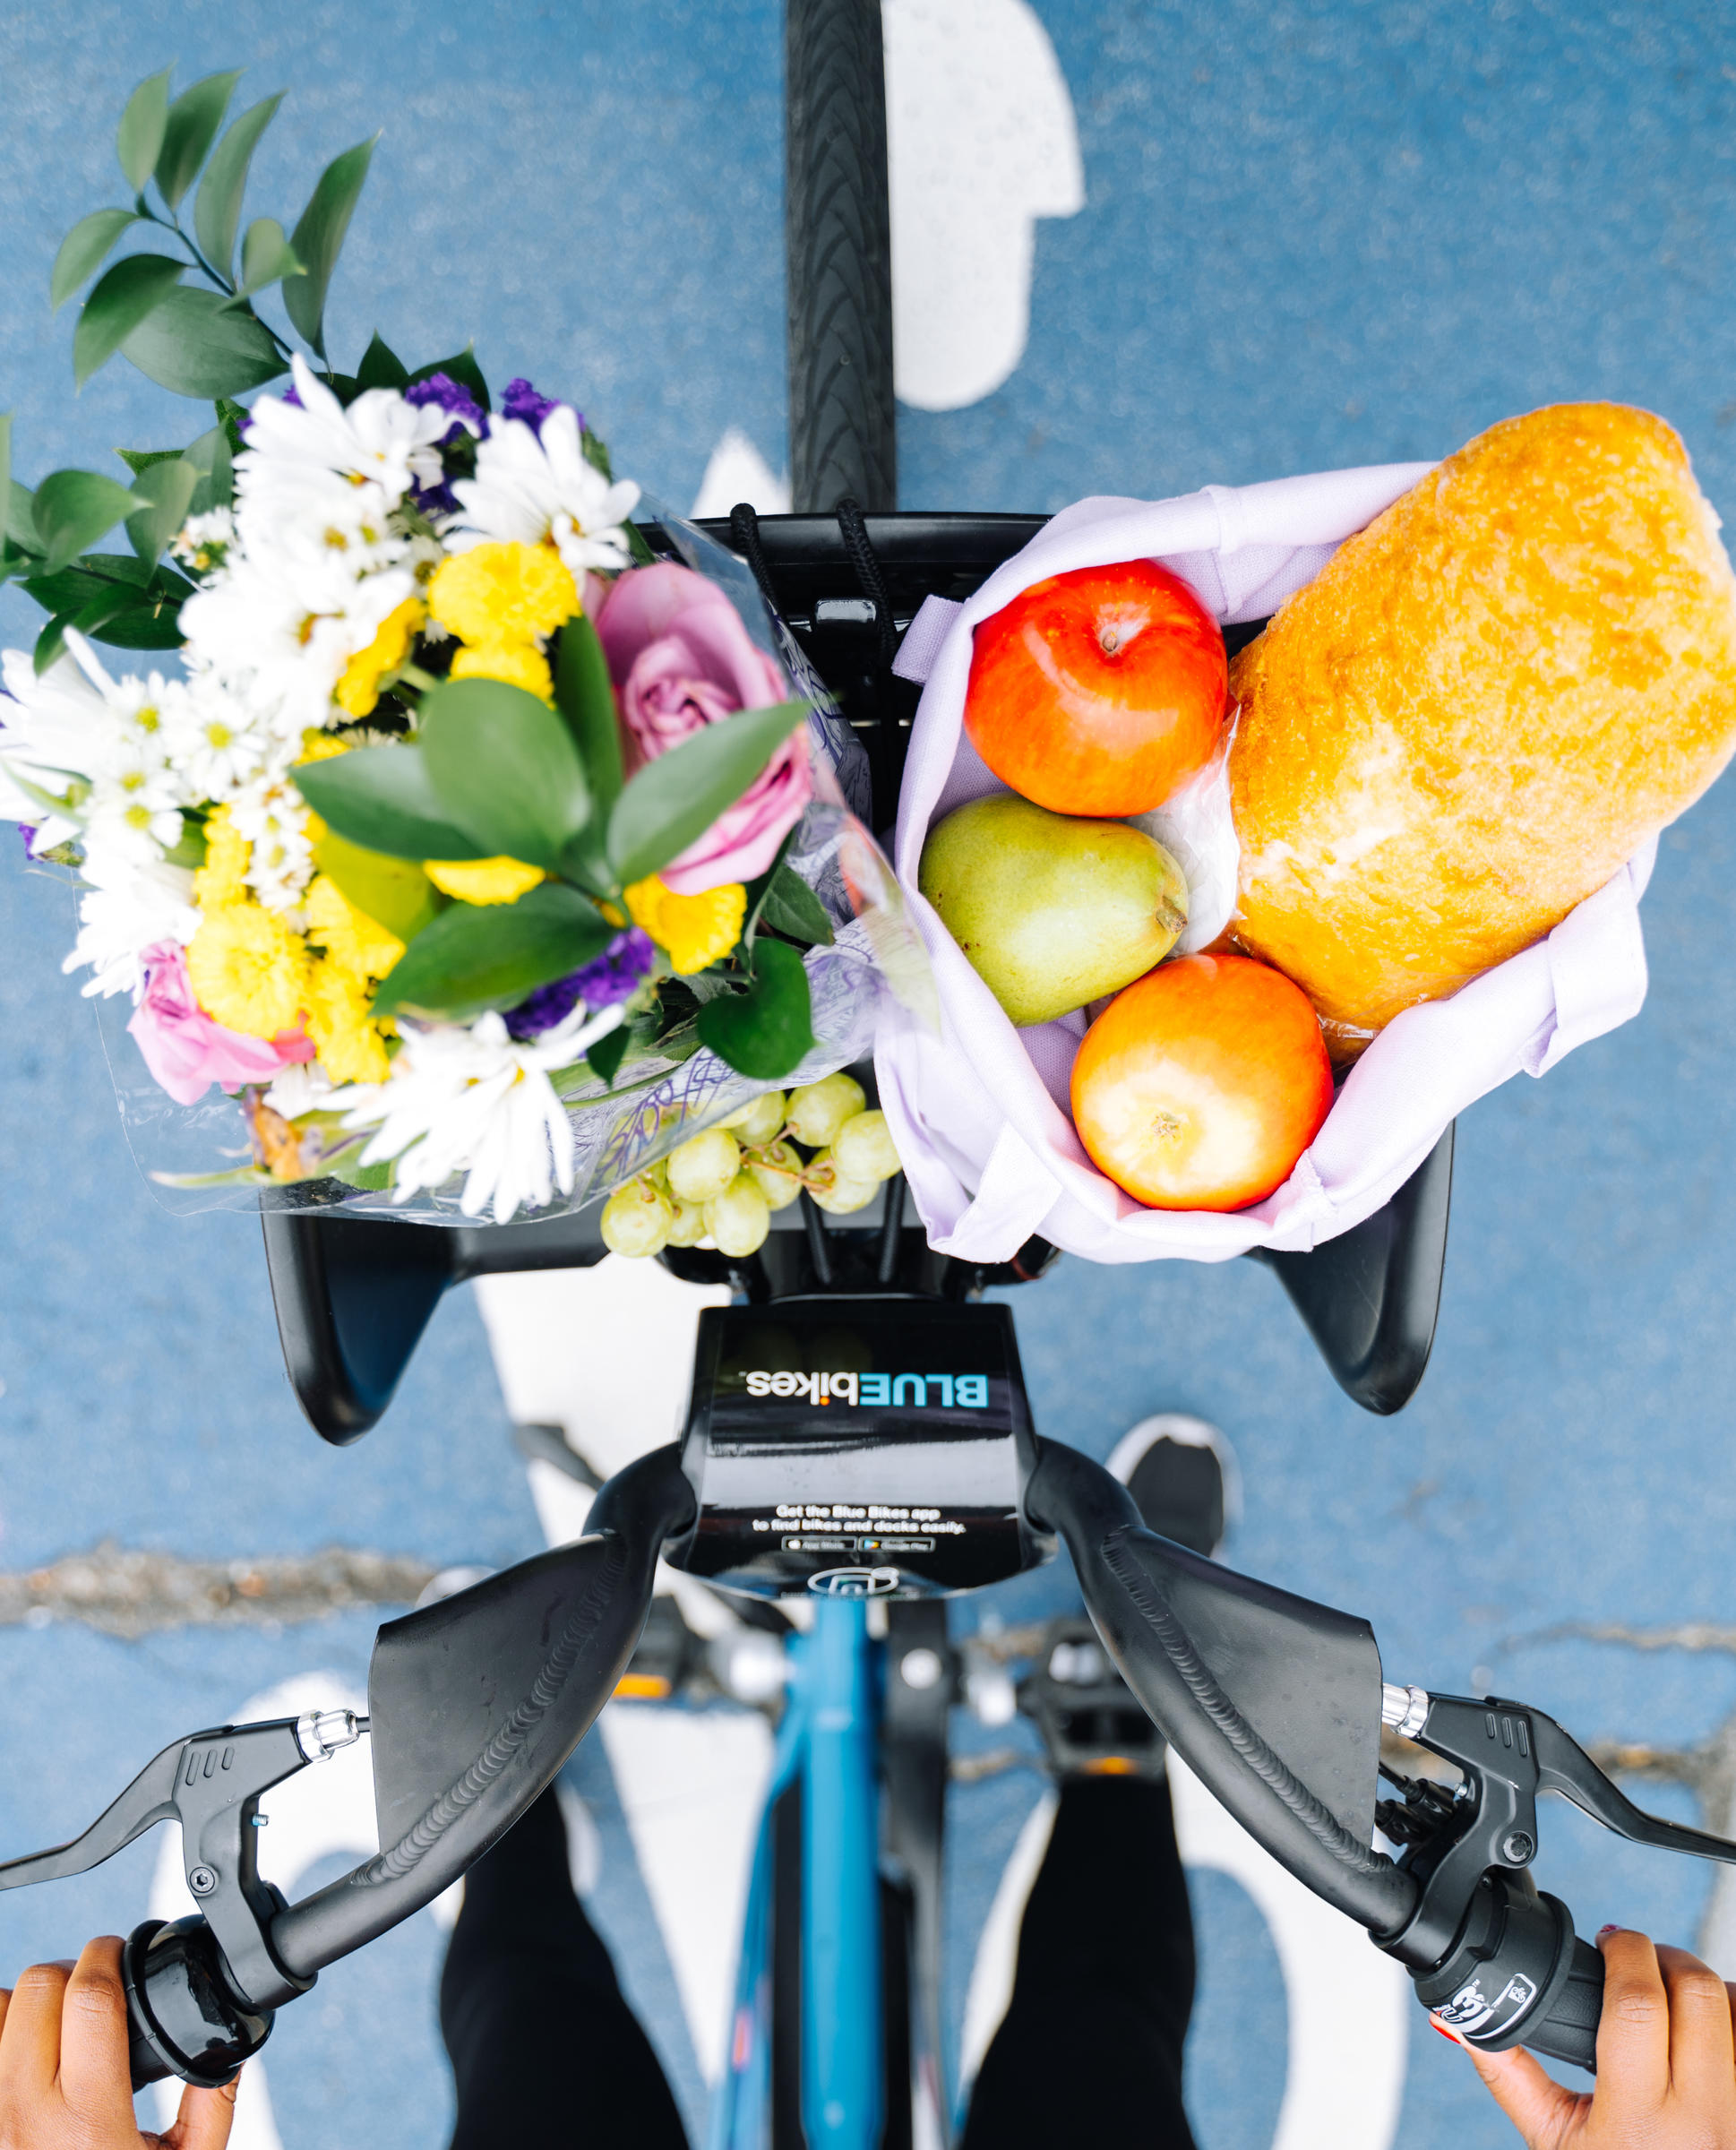 An overhead look at the front basket on a Bluebike. A bunch of flowers and a bag of groceries, including bread and apples, are in the basket.